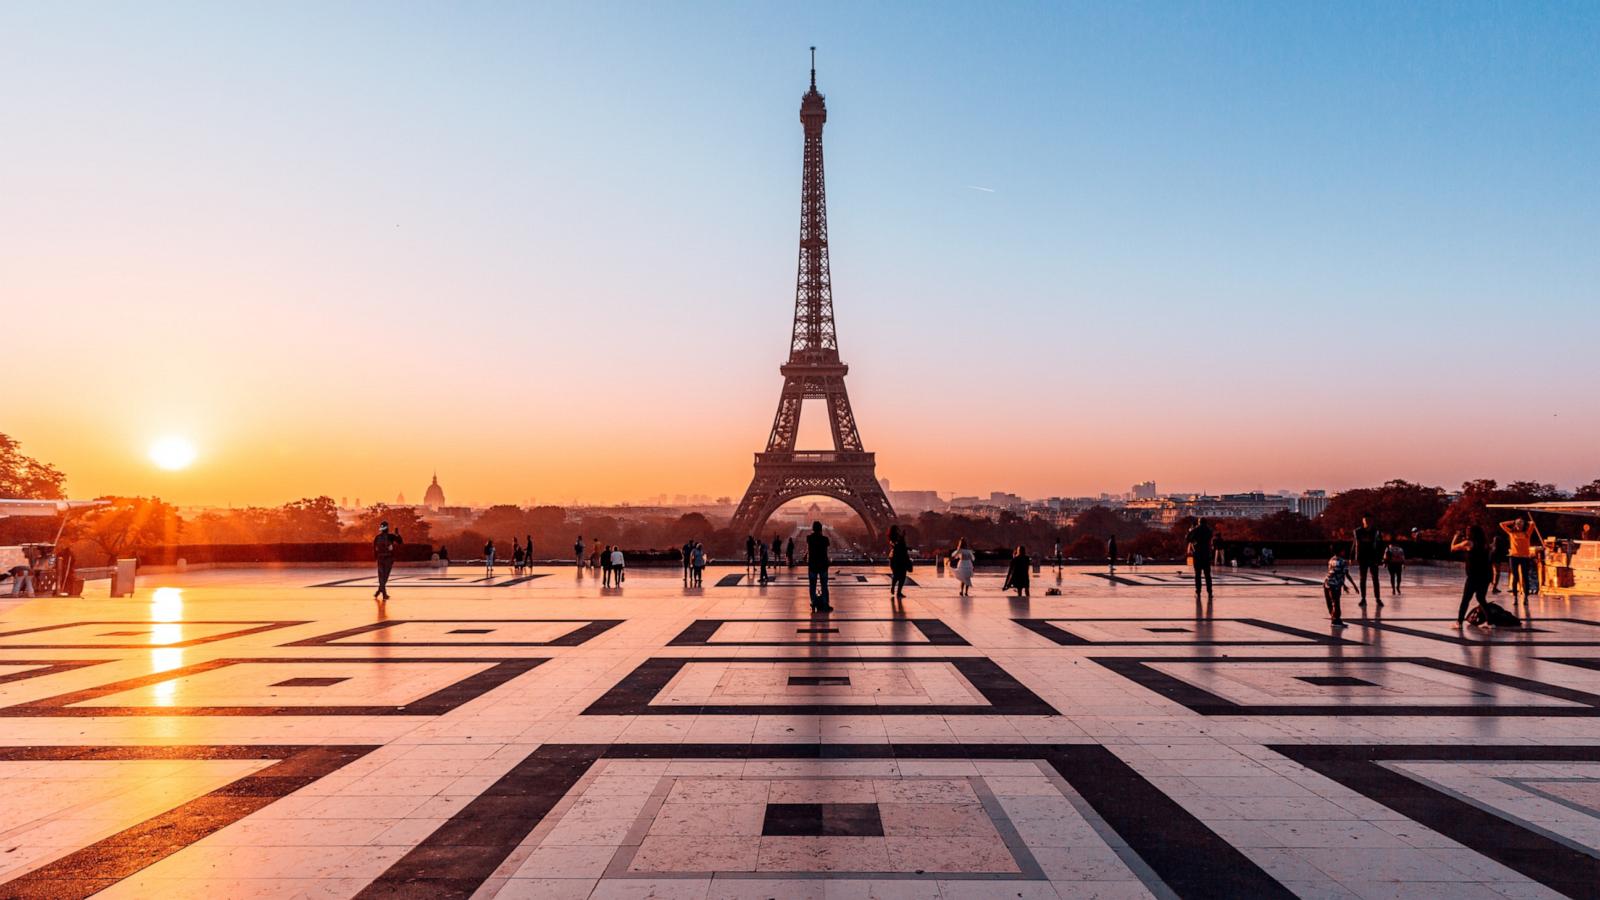 PHOTO: The Eiffel Tower and Trocadero Square at sunrise in Paris in this undated stock photo.